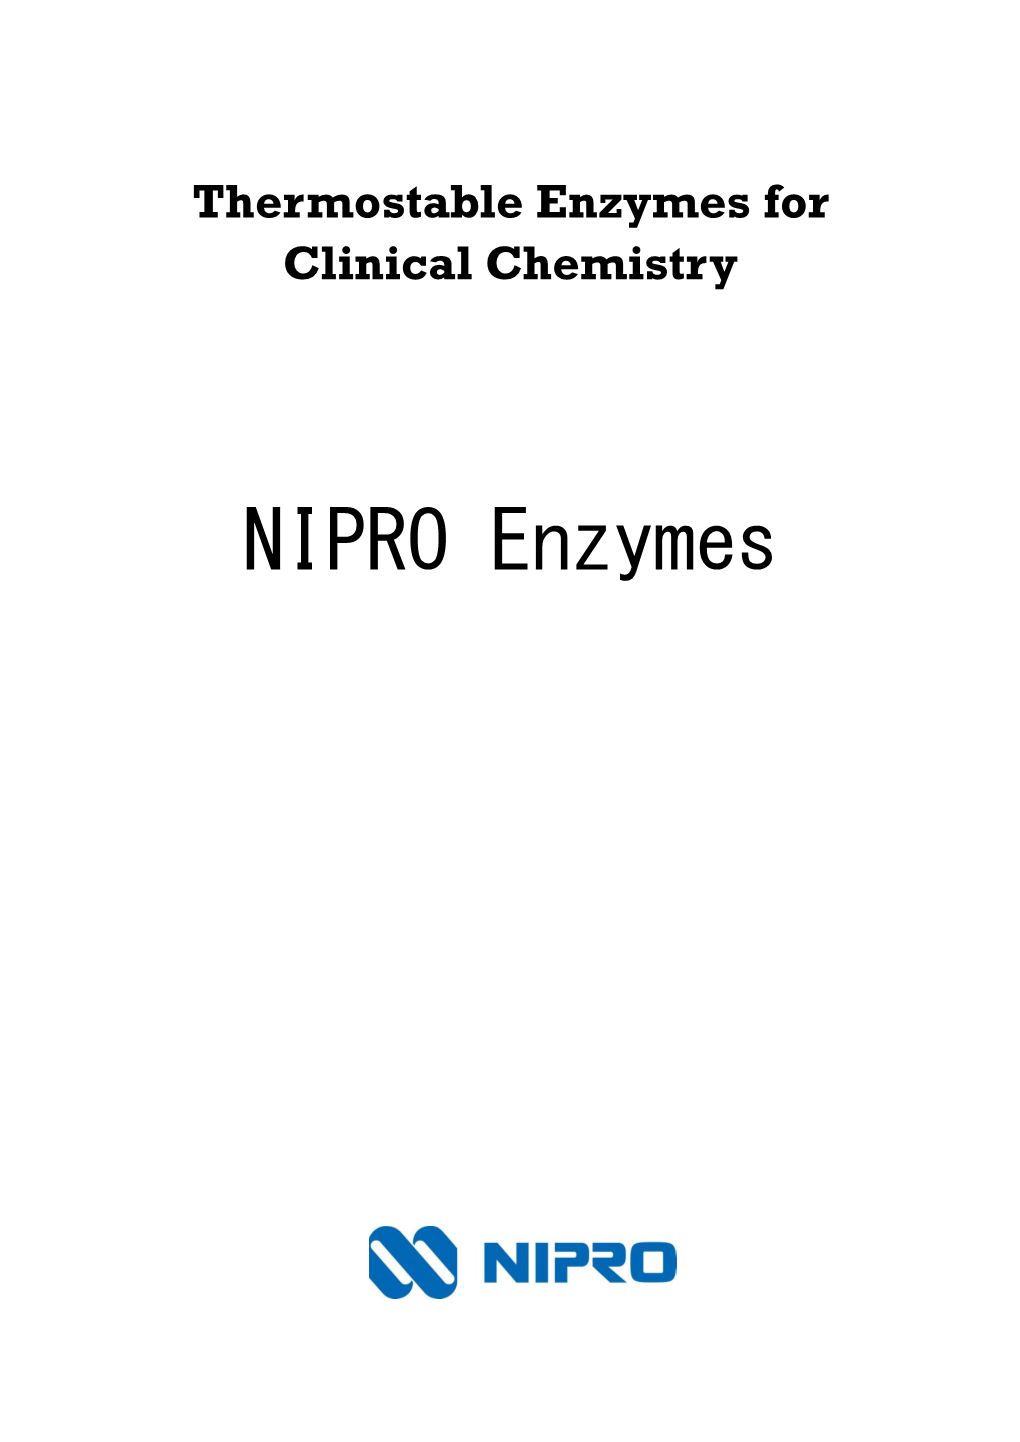 NIPRO Enzymes